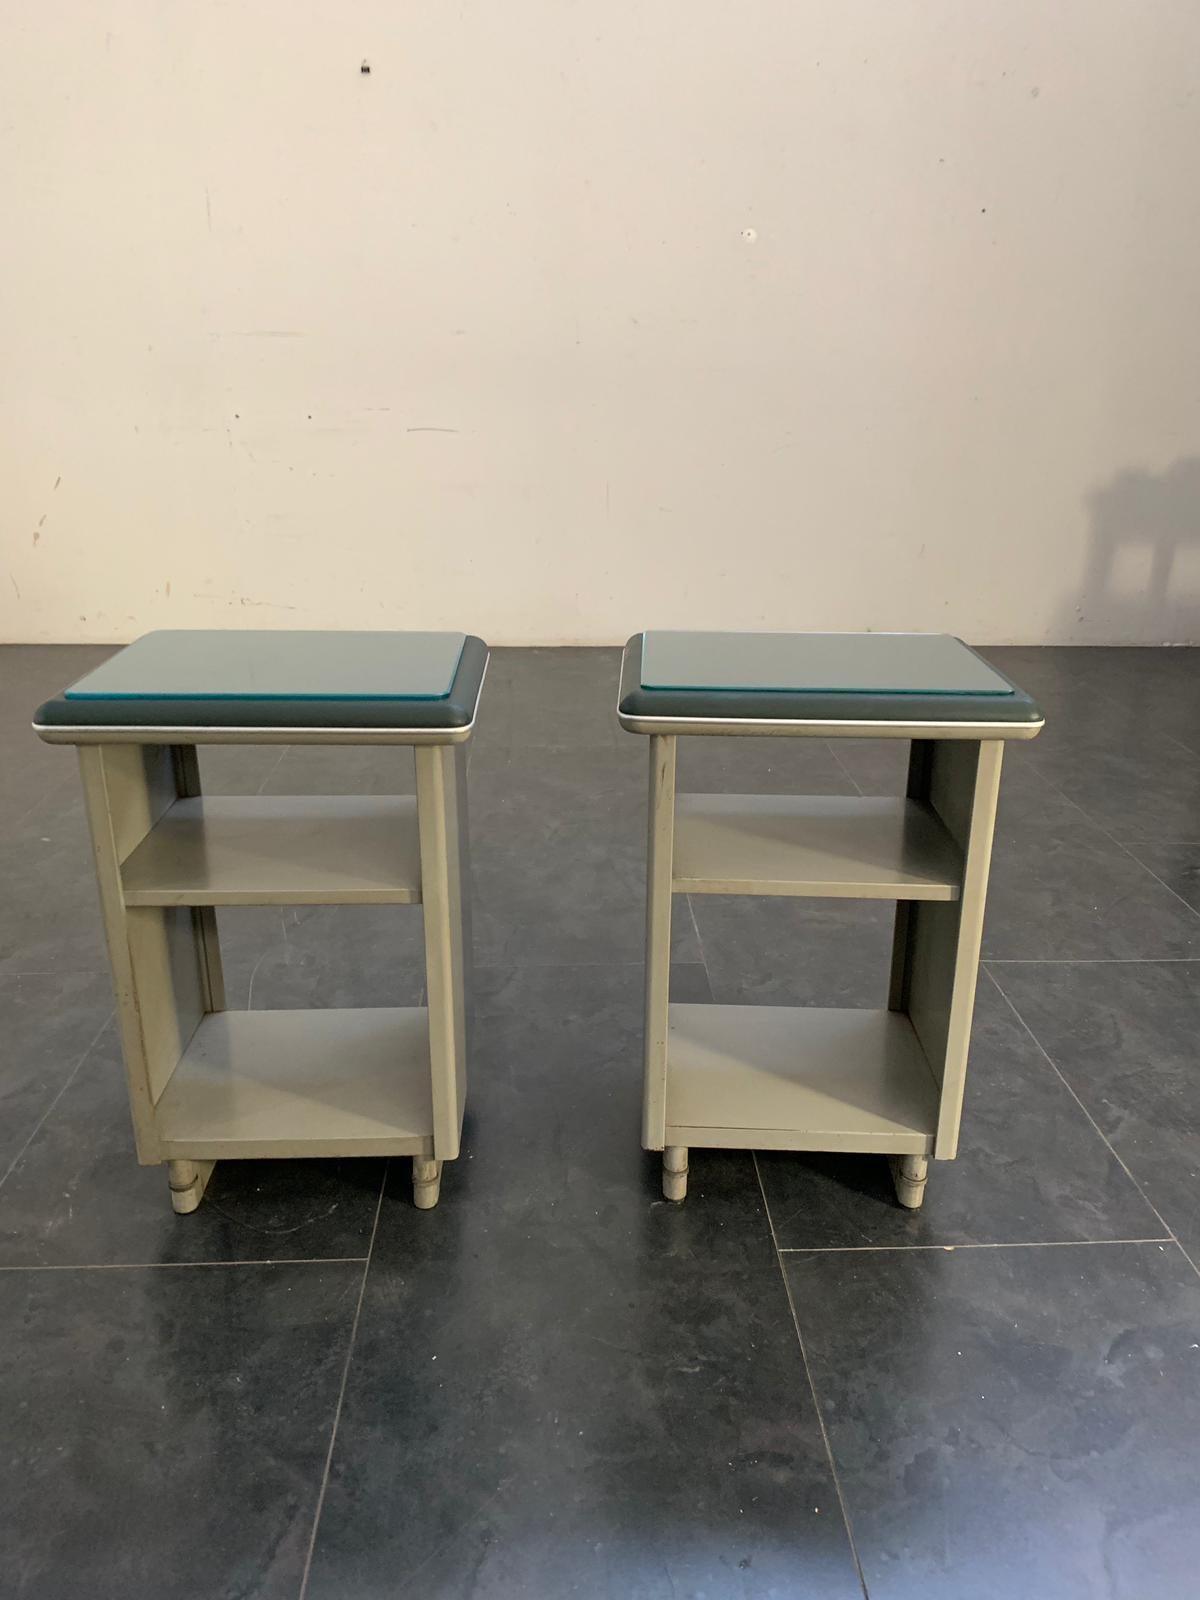 Pair of green leatherette and metal cabinets with shelf, Italy, 60s. Provenance Gabicce Mare city hall.
Packaging with bubble wrap and cardboard boxes is included. If the wooden packaging is needed (fumigated crates or boxes) for US and